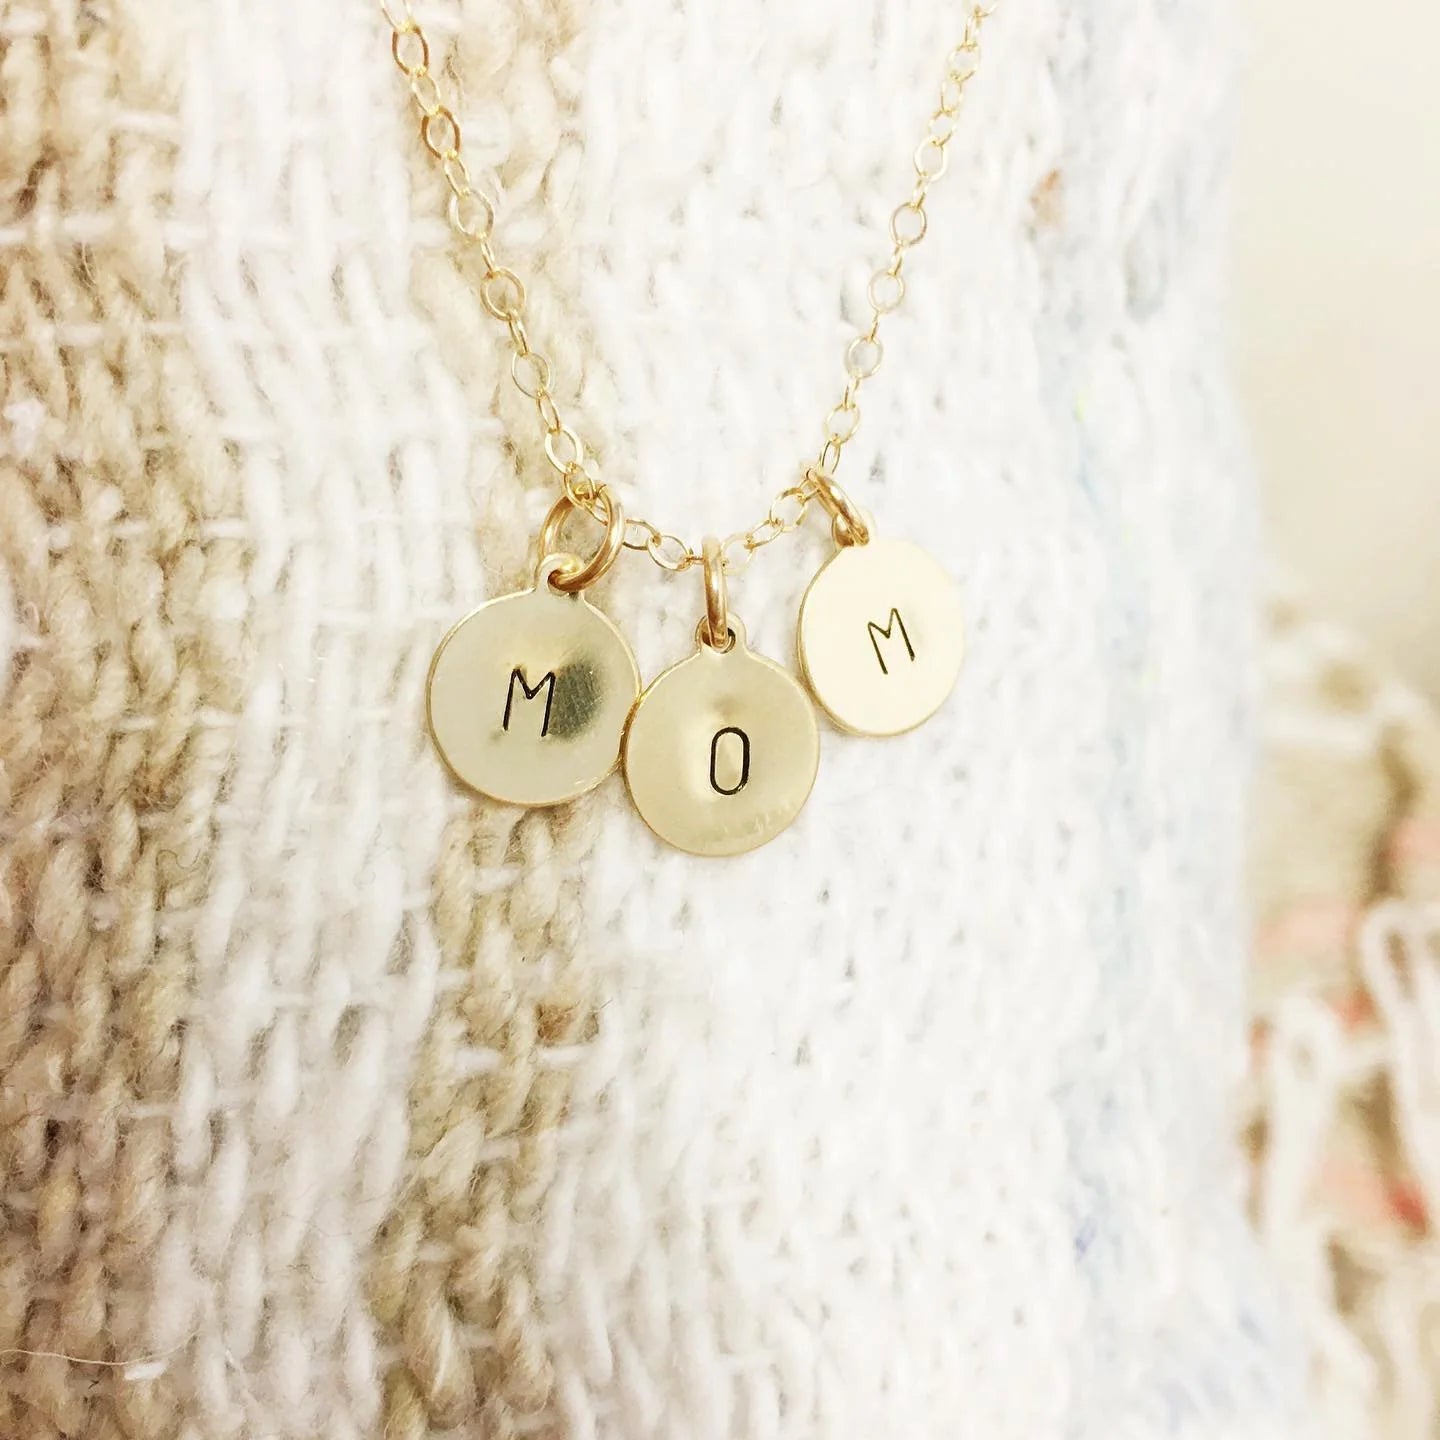 Cherished Connections: Personalized Initial Charms for an Unforgettable Mother's Day